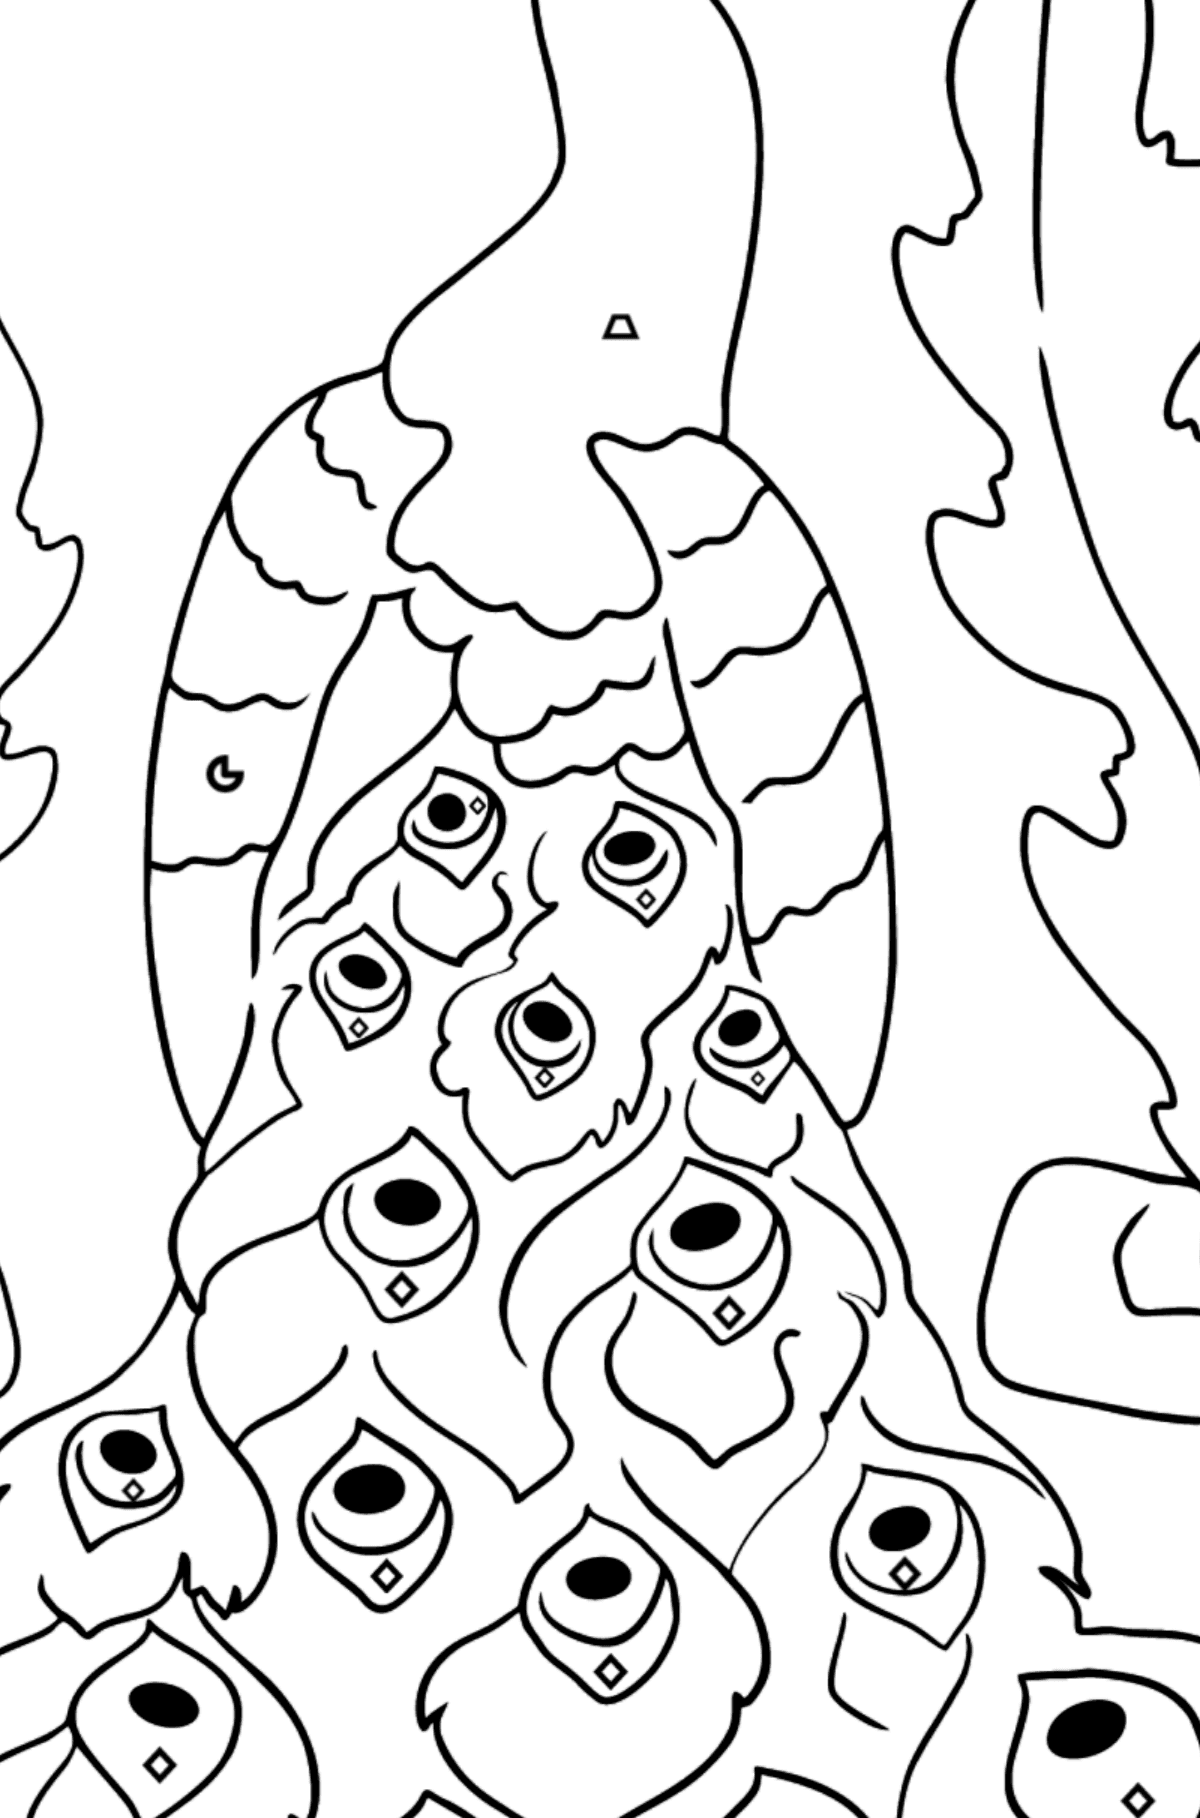 A Pompous and Haughty Peacock Coloring Page - Coloring by Geometric Shapes for Kids